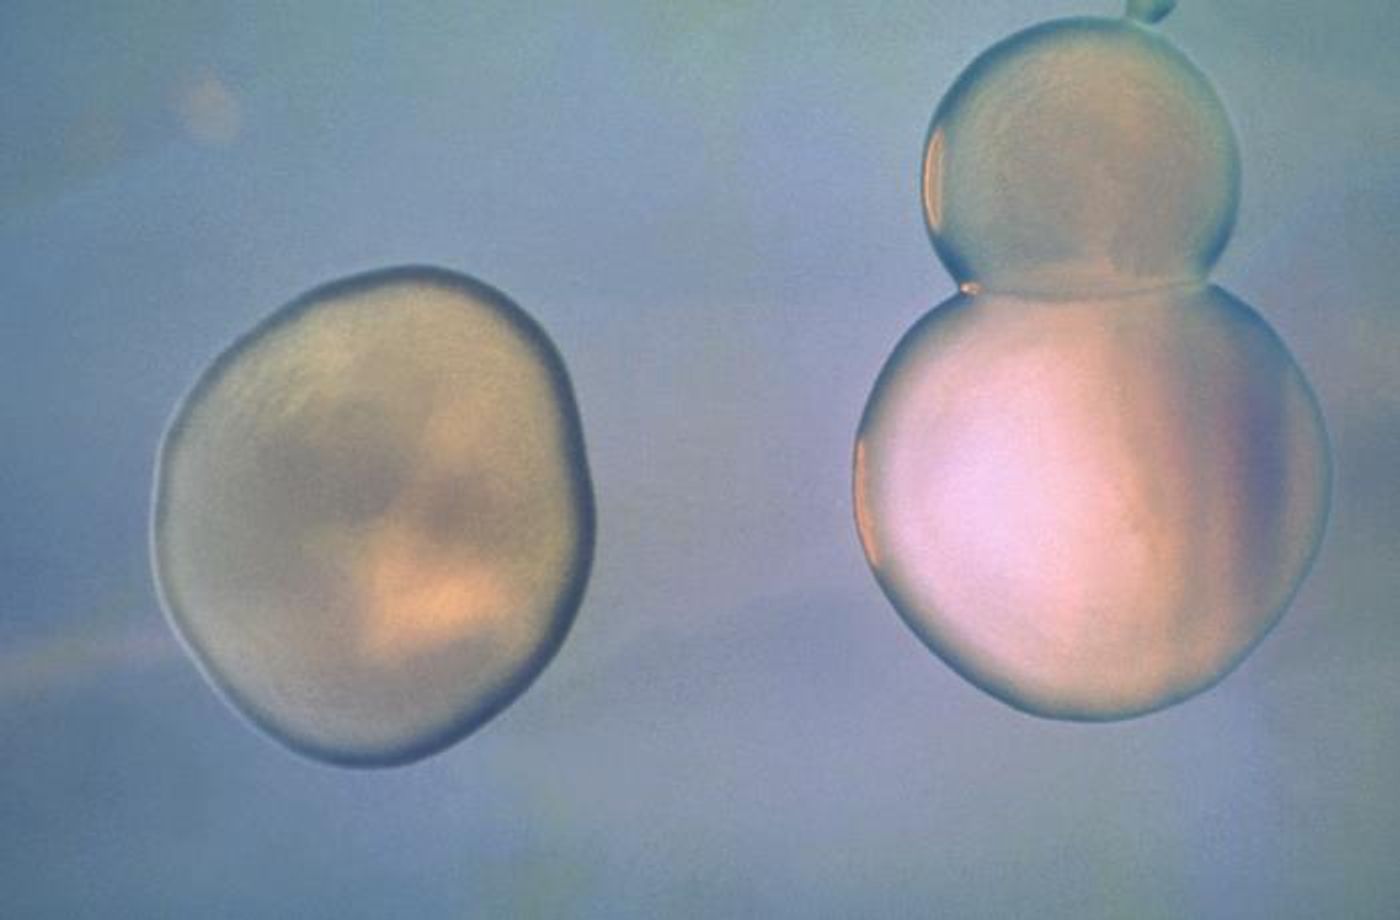 At left, with a smooth, gray-green surface, a Vibrio cholerae bacterial growth, while on the right, each exhibiting a smooth surface with a metallic sheen, are Escherichia coli bacterial organisms. / Credit: CDC/ Dr. W.H. Ewing